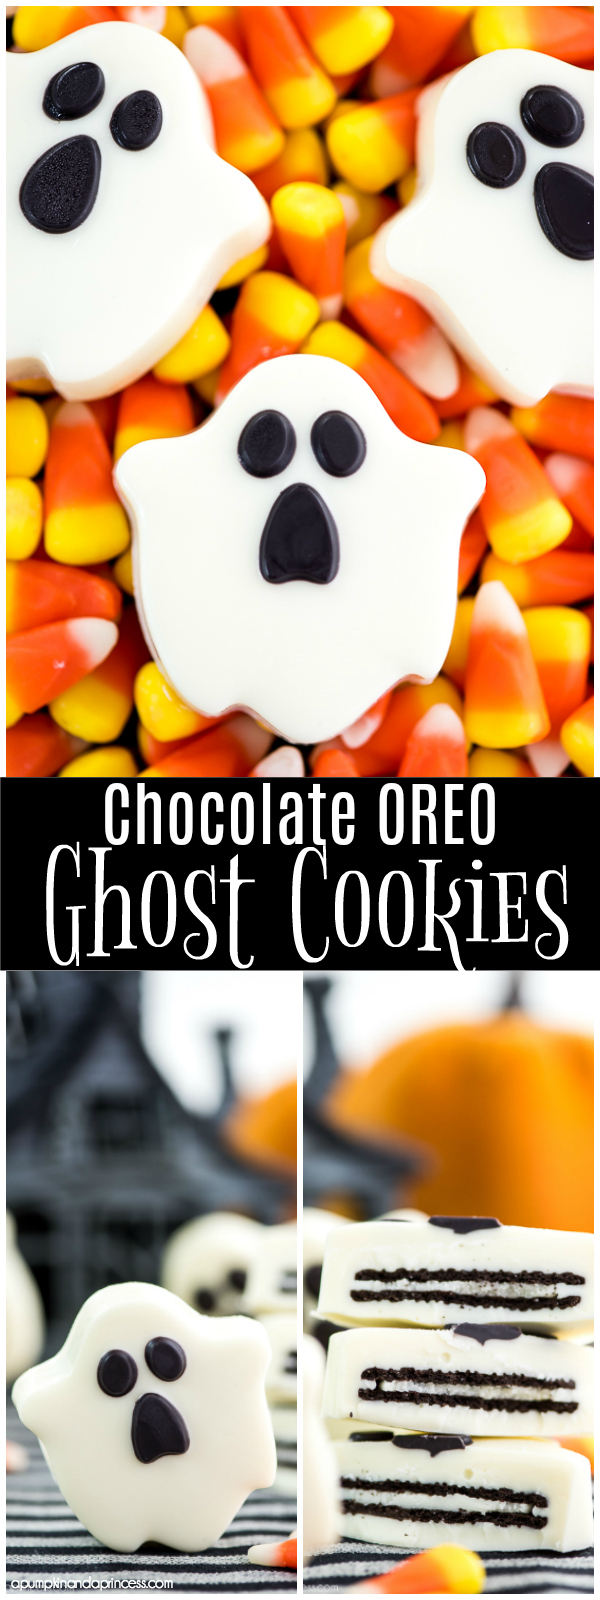 OREO Ghost Cookies – these chocolate covered OREO cookies are great for Halloween parties!